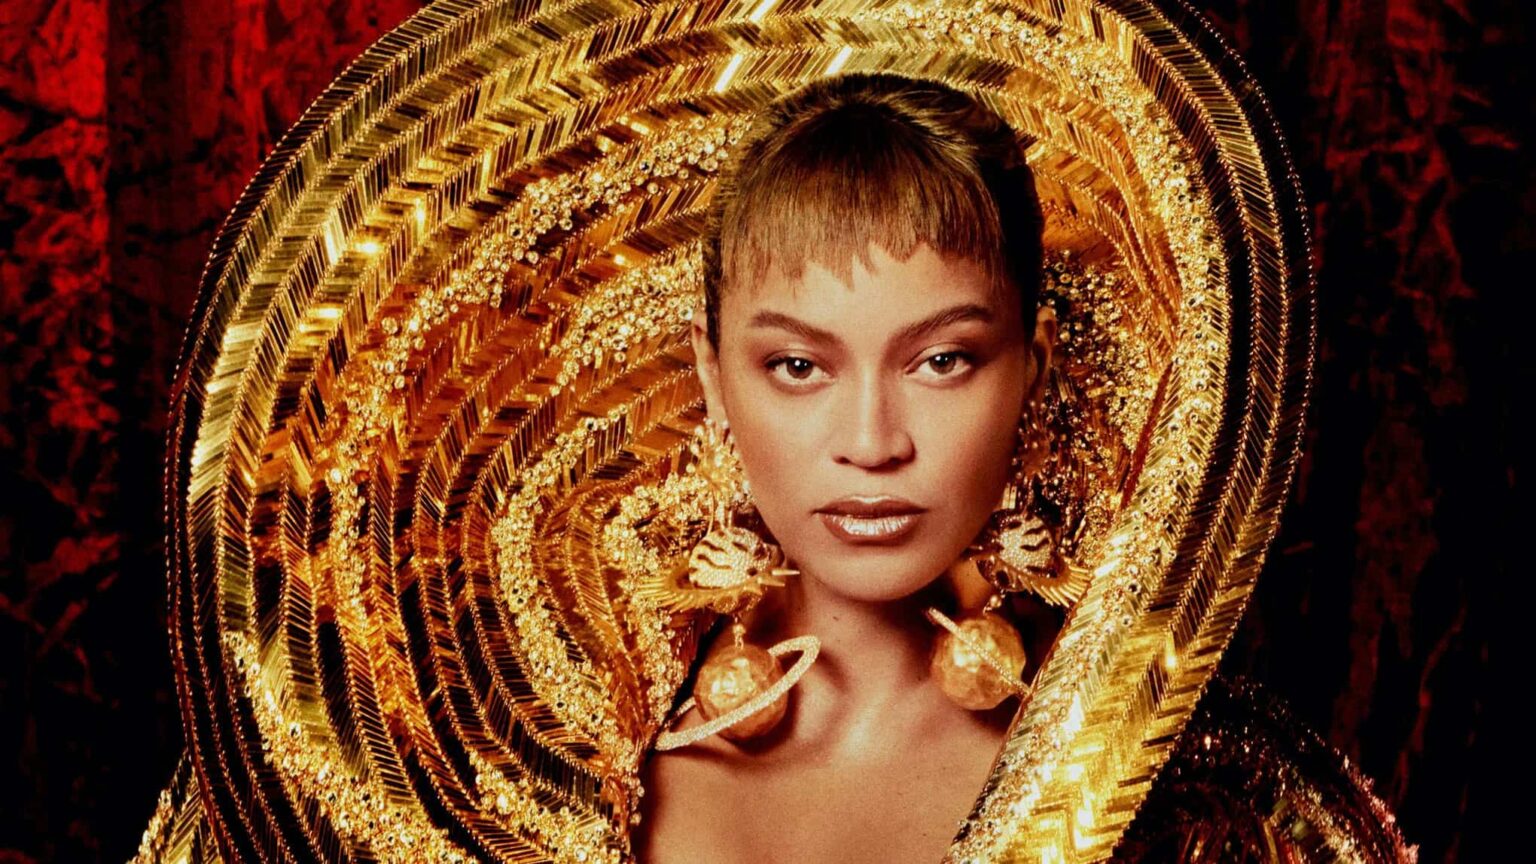 Besides the anticipation we’re all feeling, we’re also wondering how high is Beyoncé’s net worth. How will 'Renaissance' bump those numbers even higher?